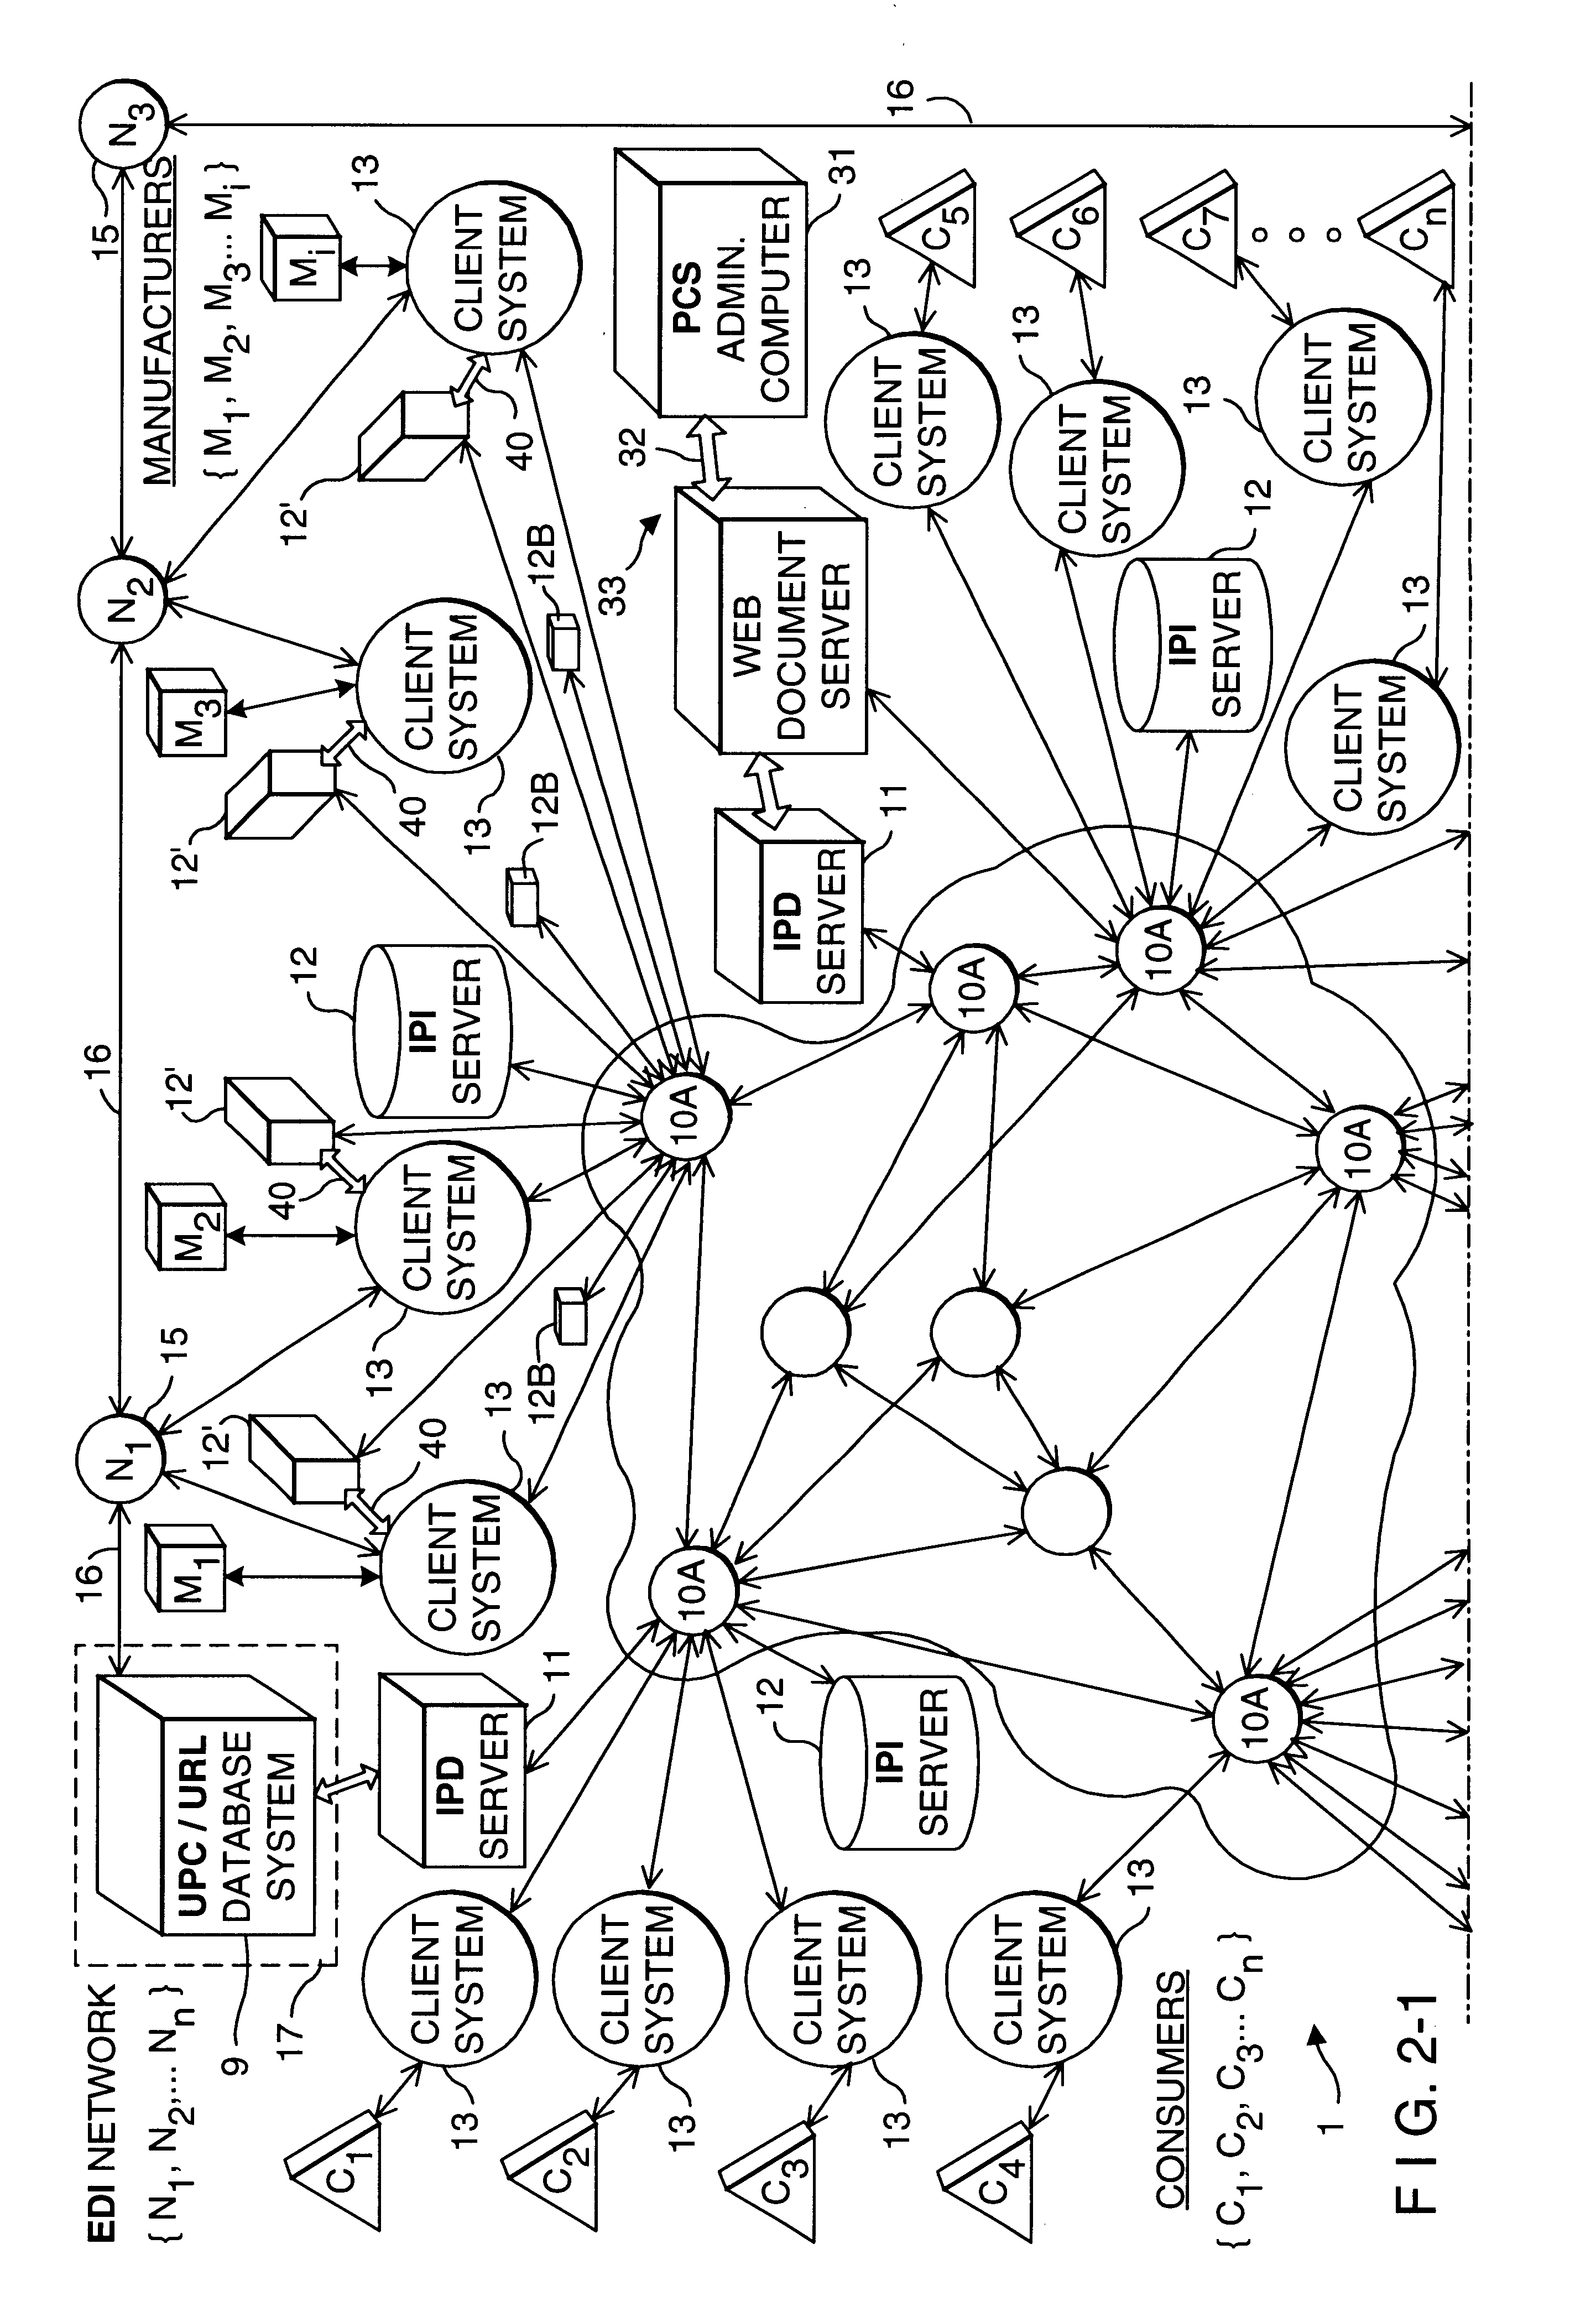 Consumer product information request (CPIR) enabling servlets and web-based consumer product information catalogs employing the same